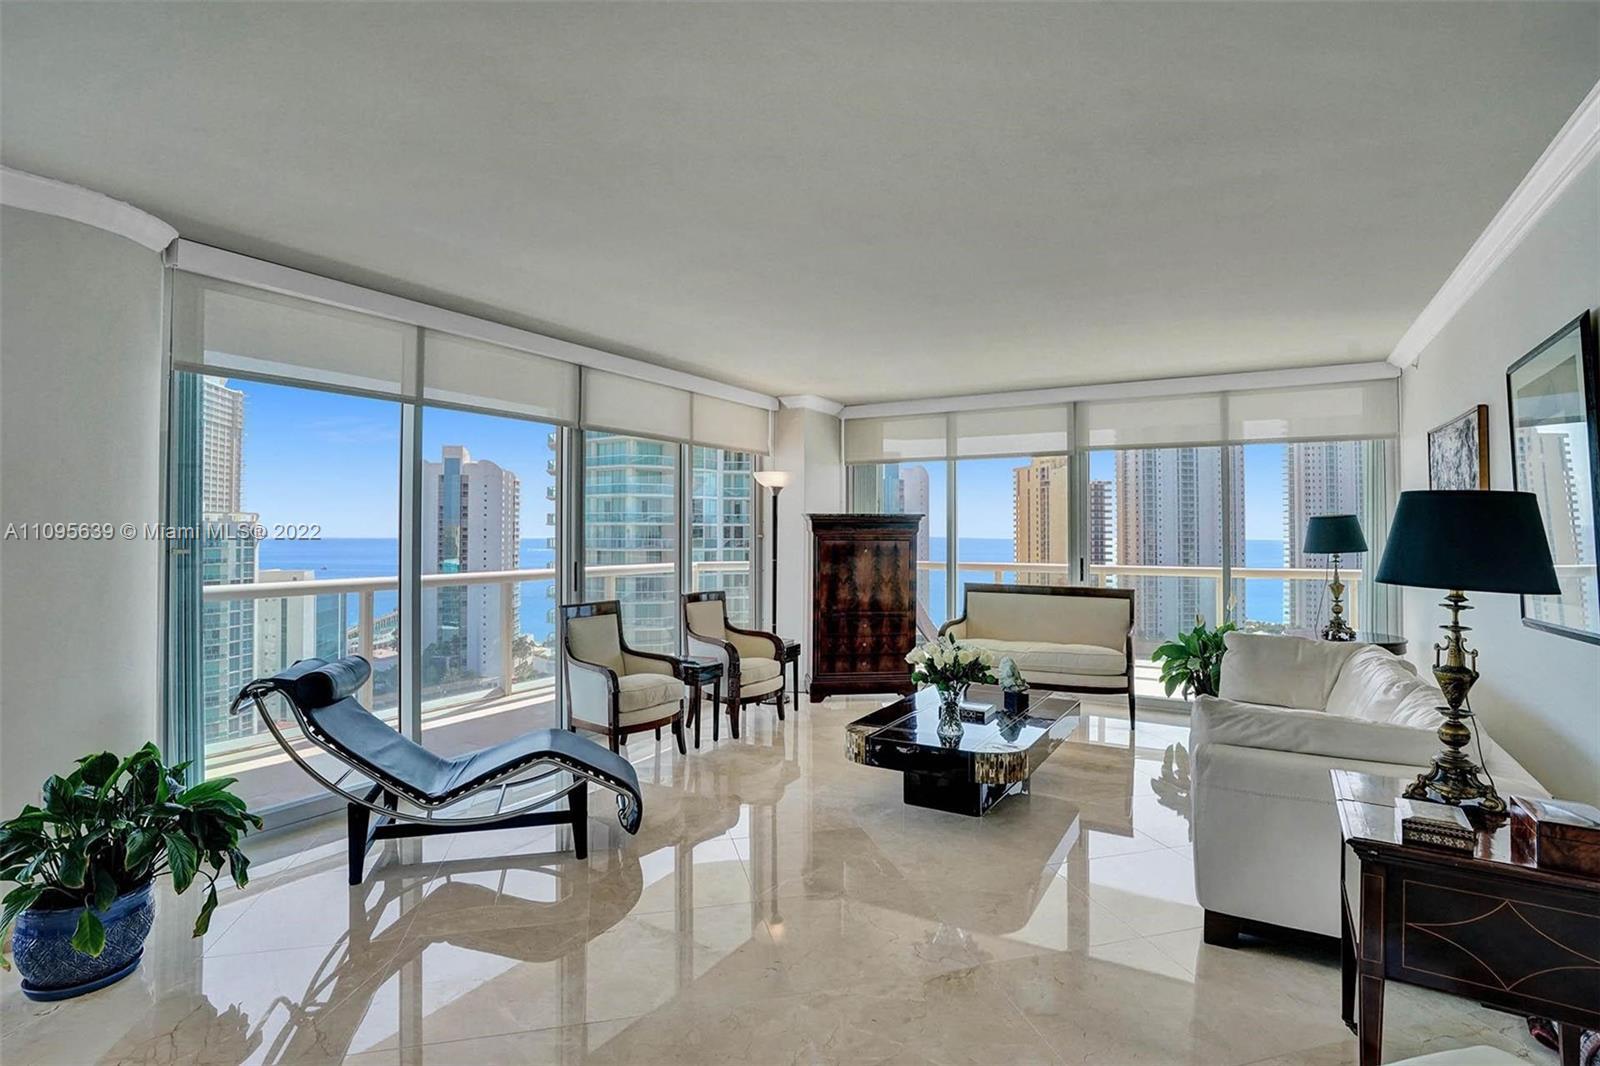 This special corner property is in the sought out area of Sunny Isles Beach. It has breathtaking vie